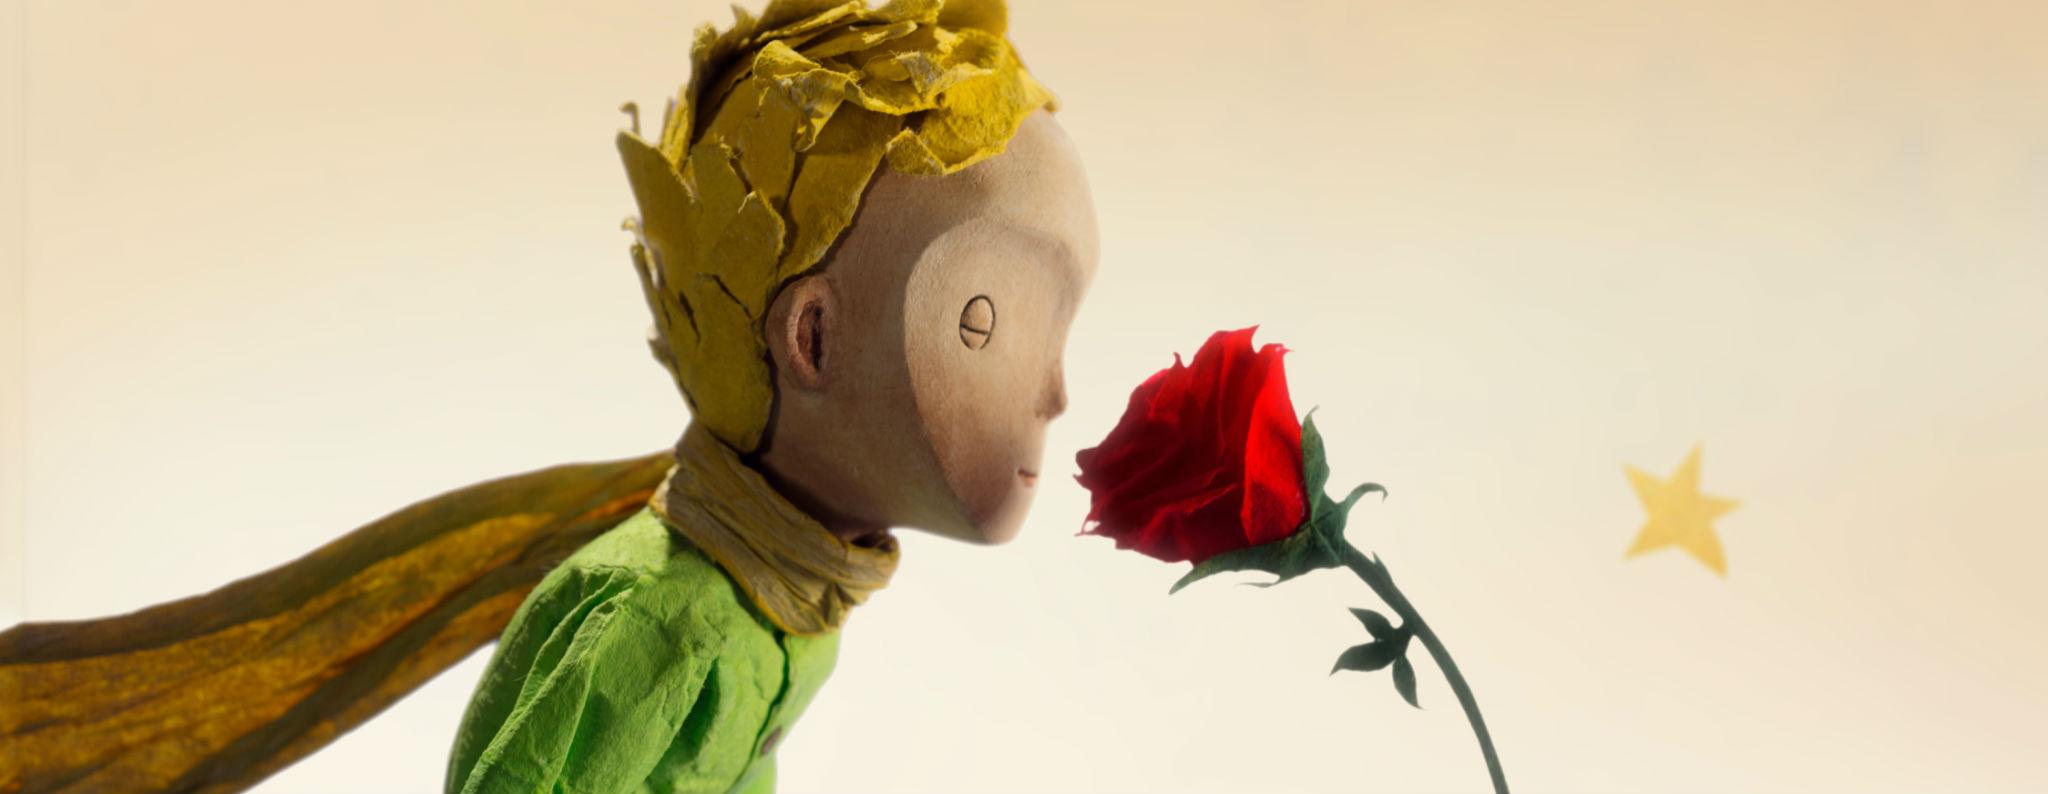 the-rose-the-little-prince